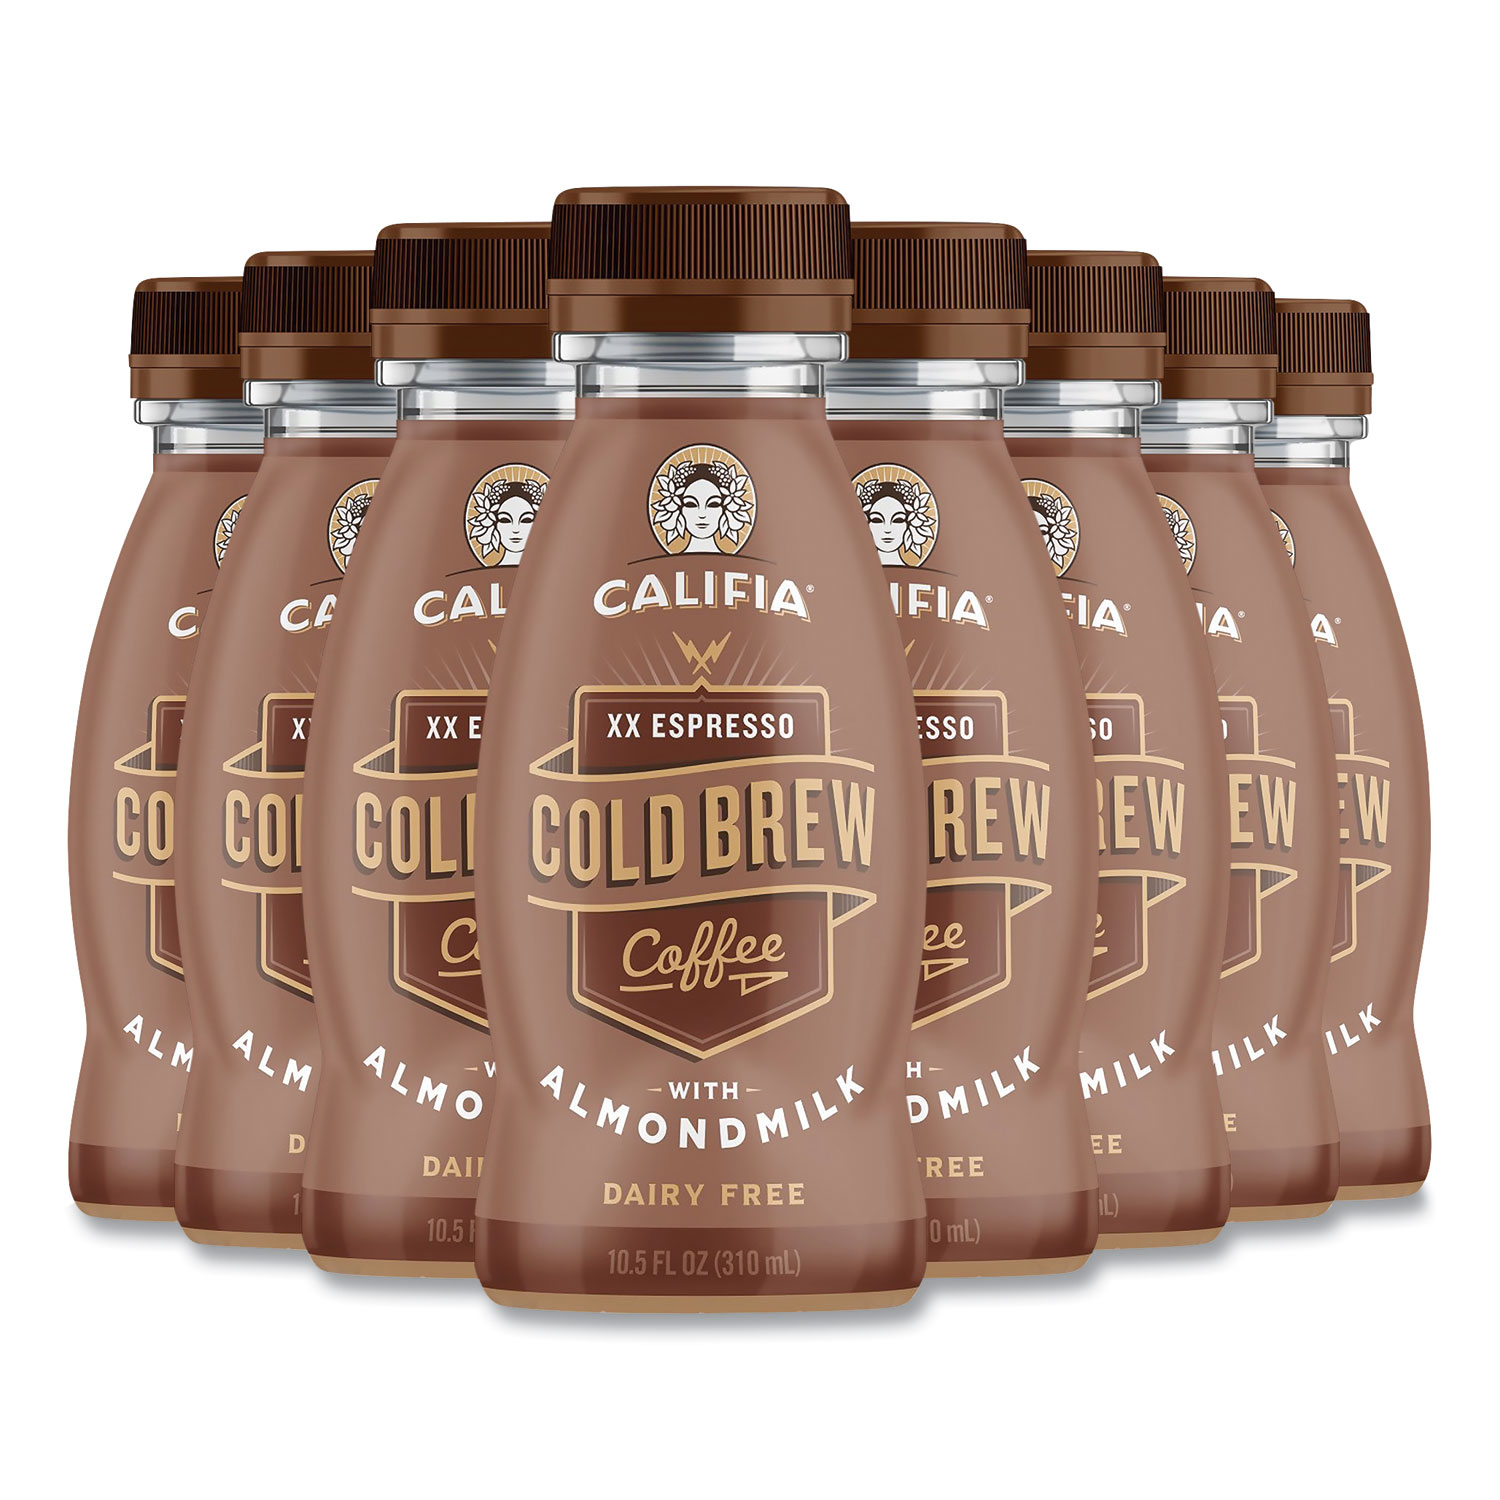  CALIFIA FARMS 420100 Cold Brew Coffee with Almond Milk, 10.5 oz Bottle, XX Expresso, 8/Pack, Free Delivery in 1-4 Business Days (GRR90200447) 